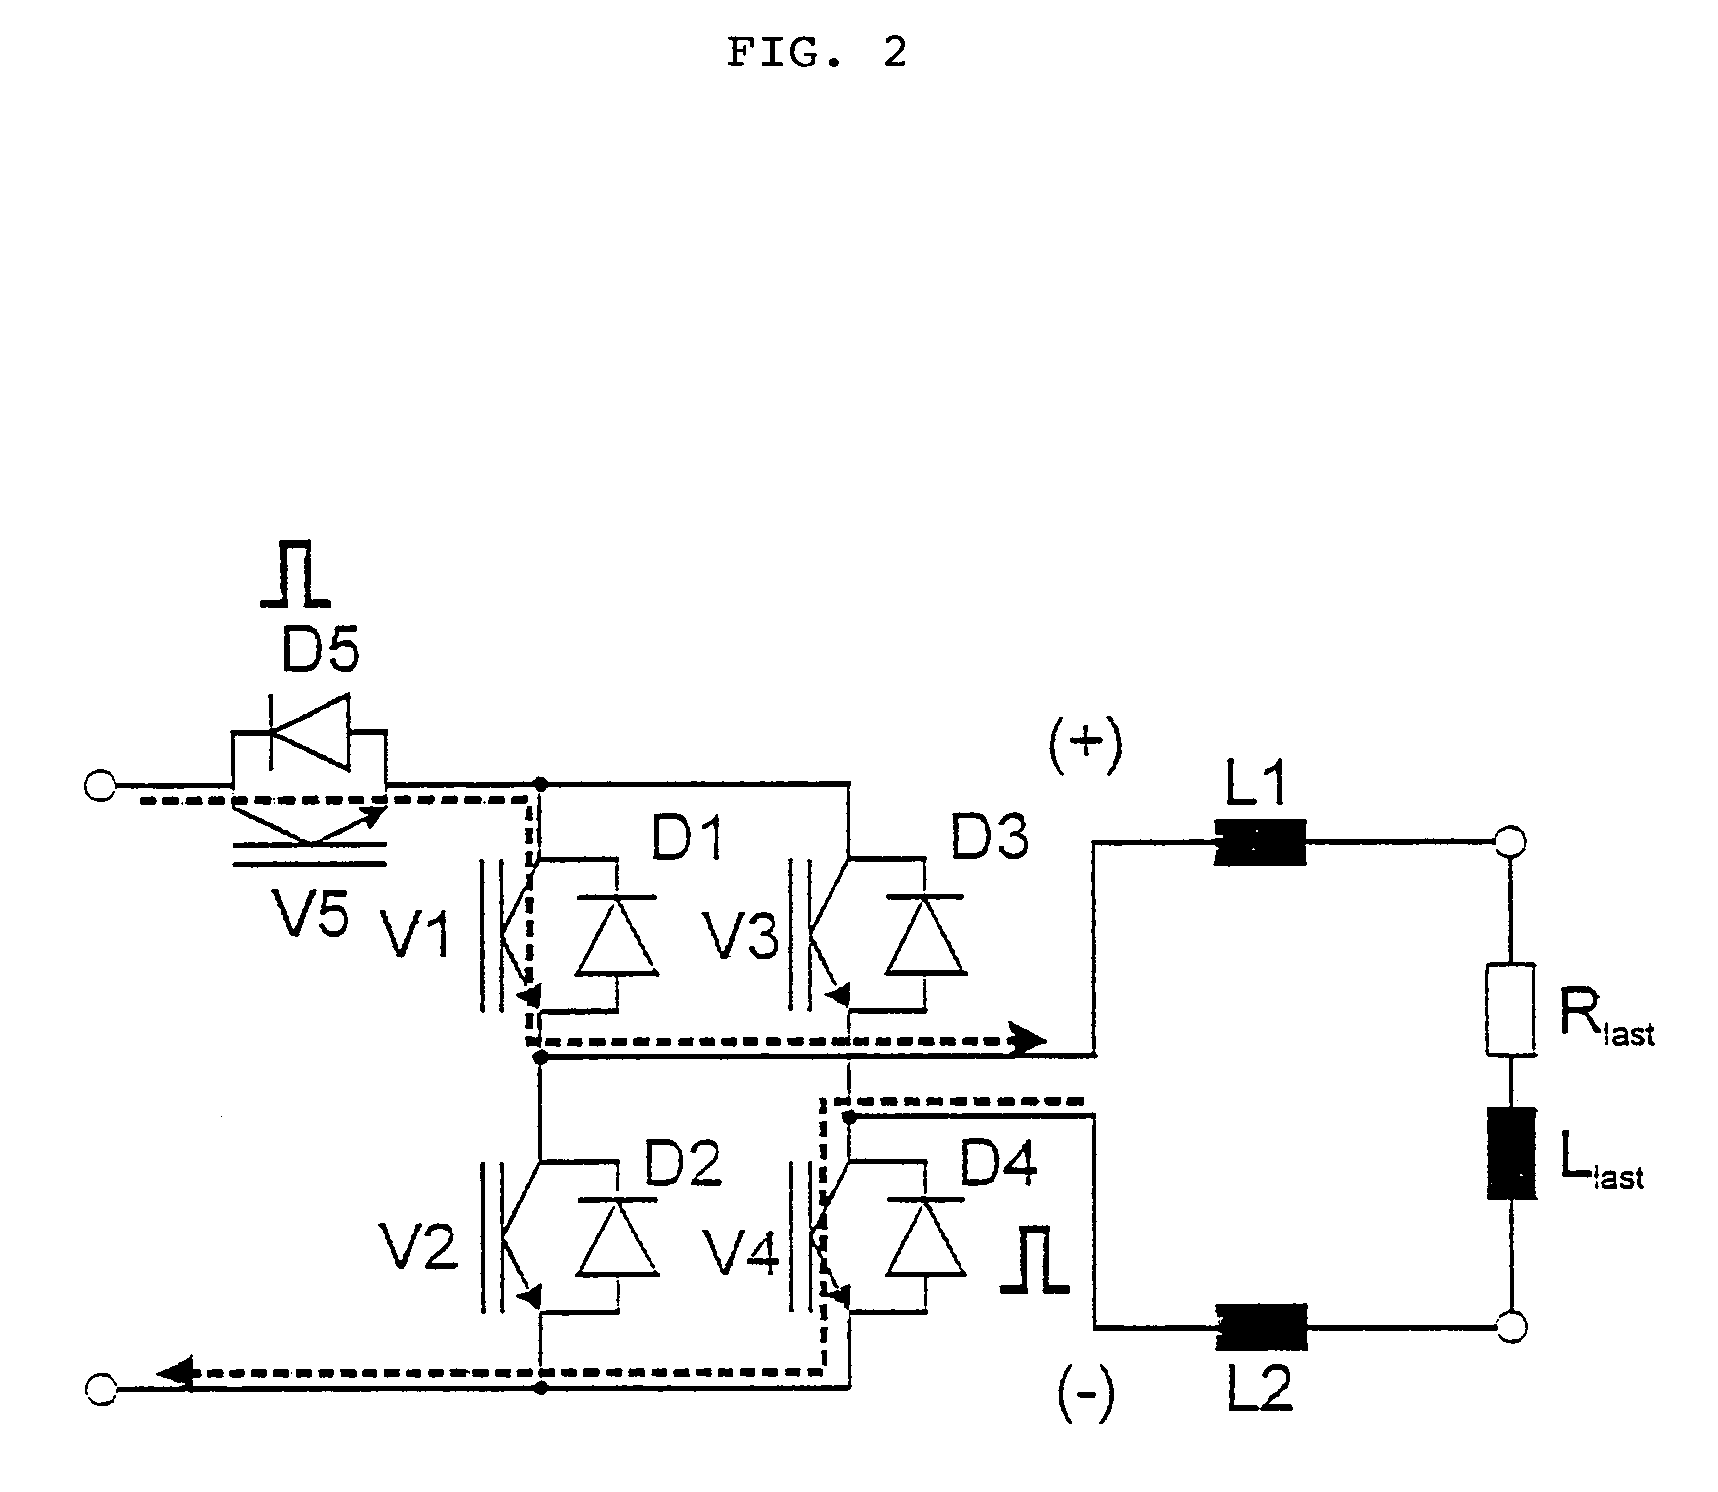 Method of converting a direct current voltage from a source of direct current voltage, more specifically from a photovoltaic source of direct current voltage, into a alternating current voltage